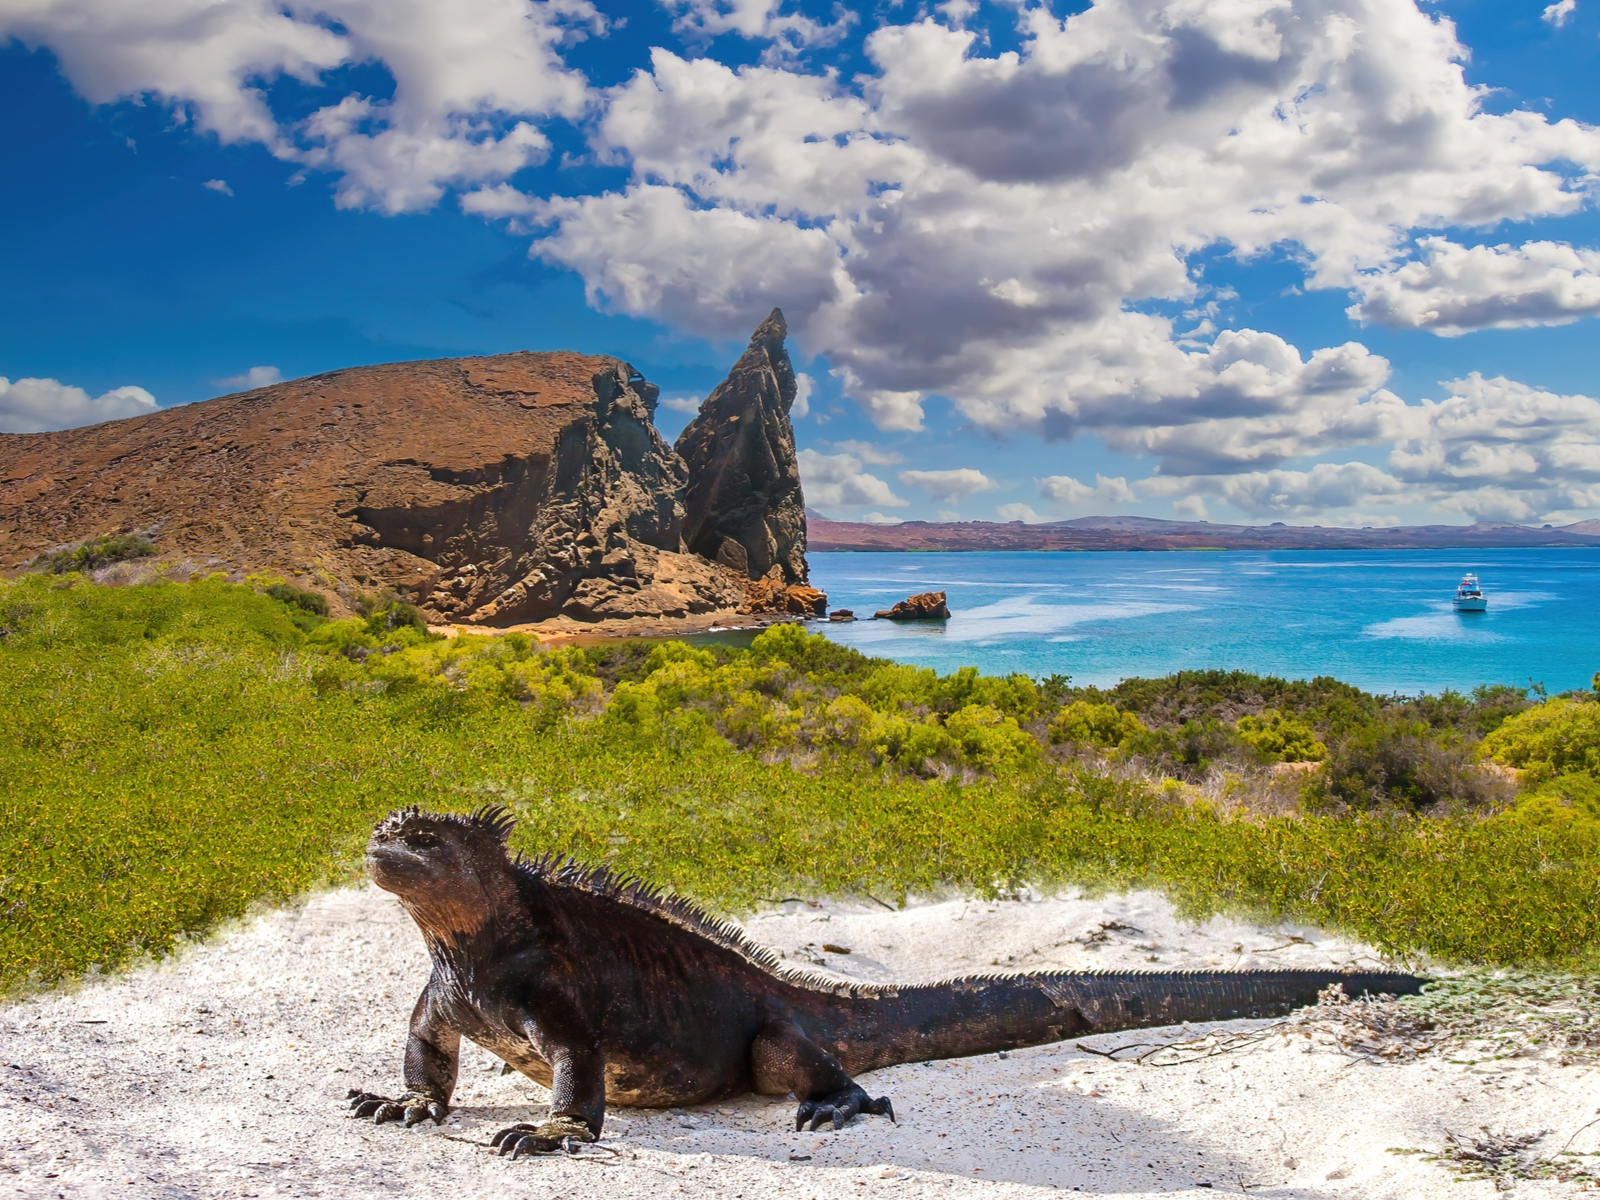 Iguana on the sand next to the coastline and grass during the best time to visit the Galapagos Island